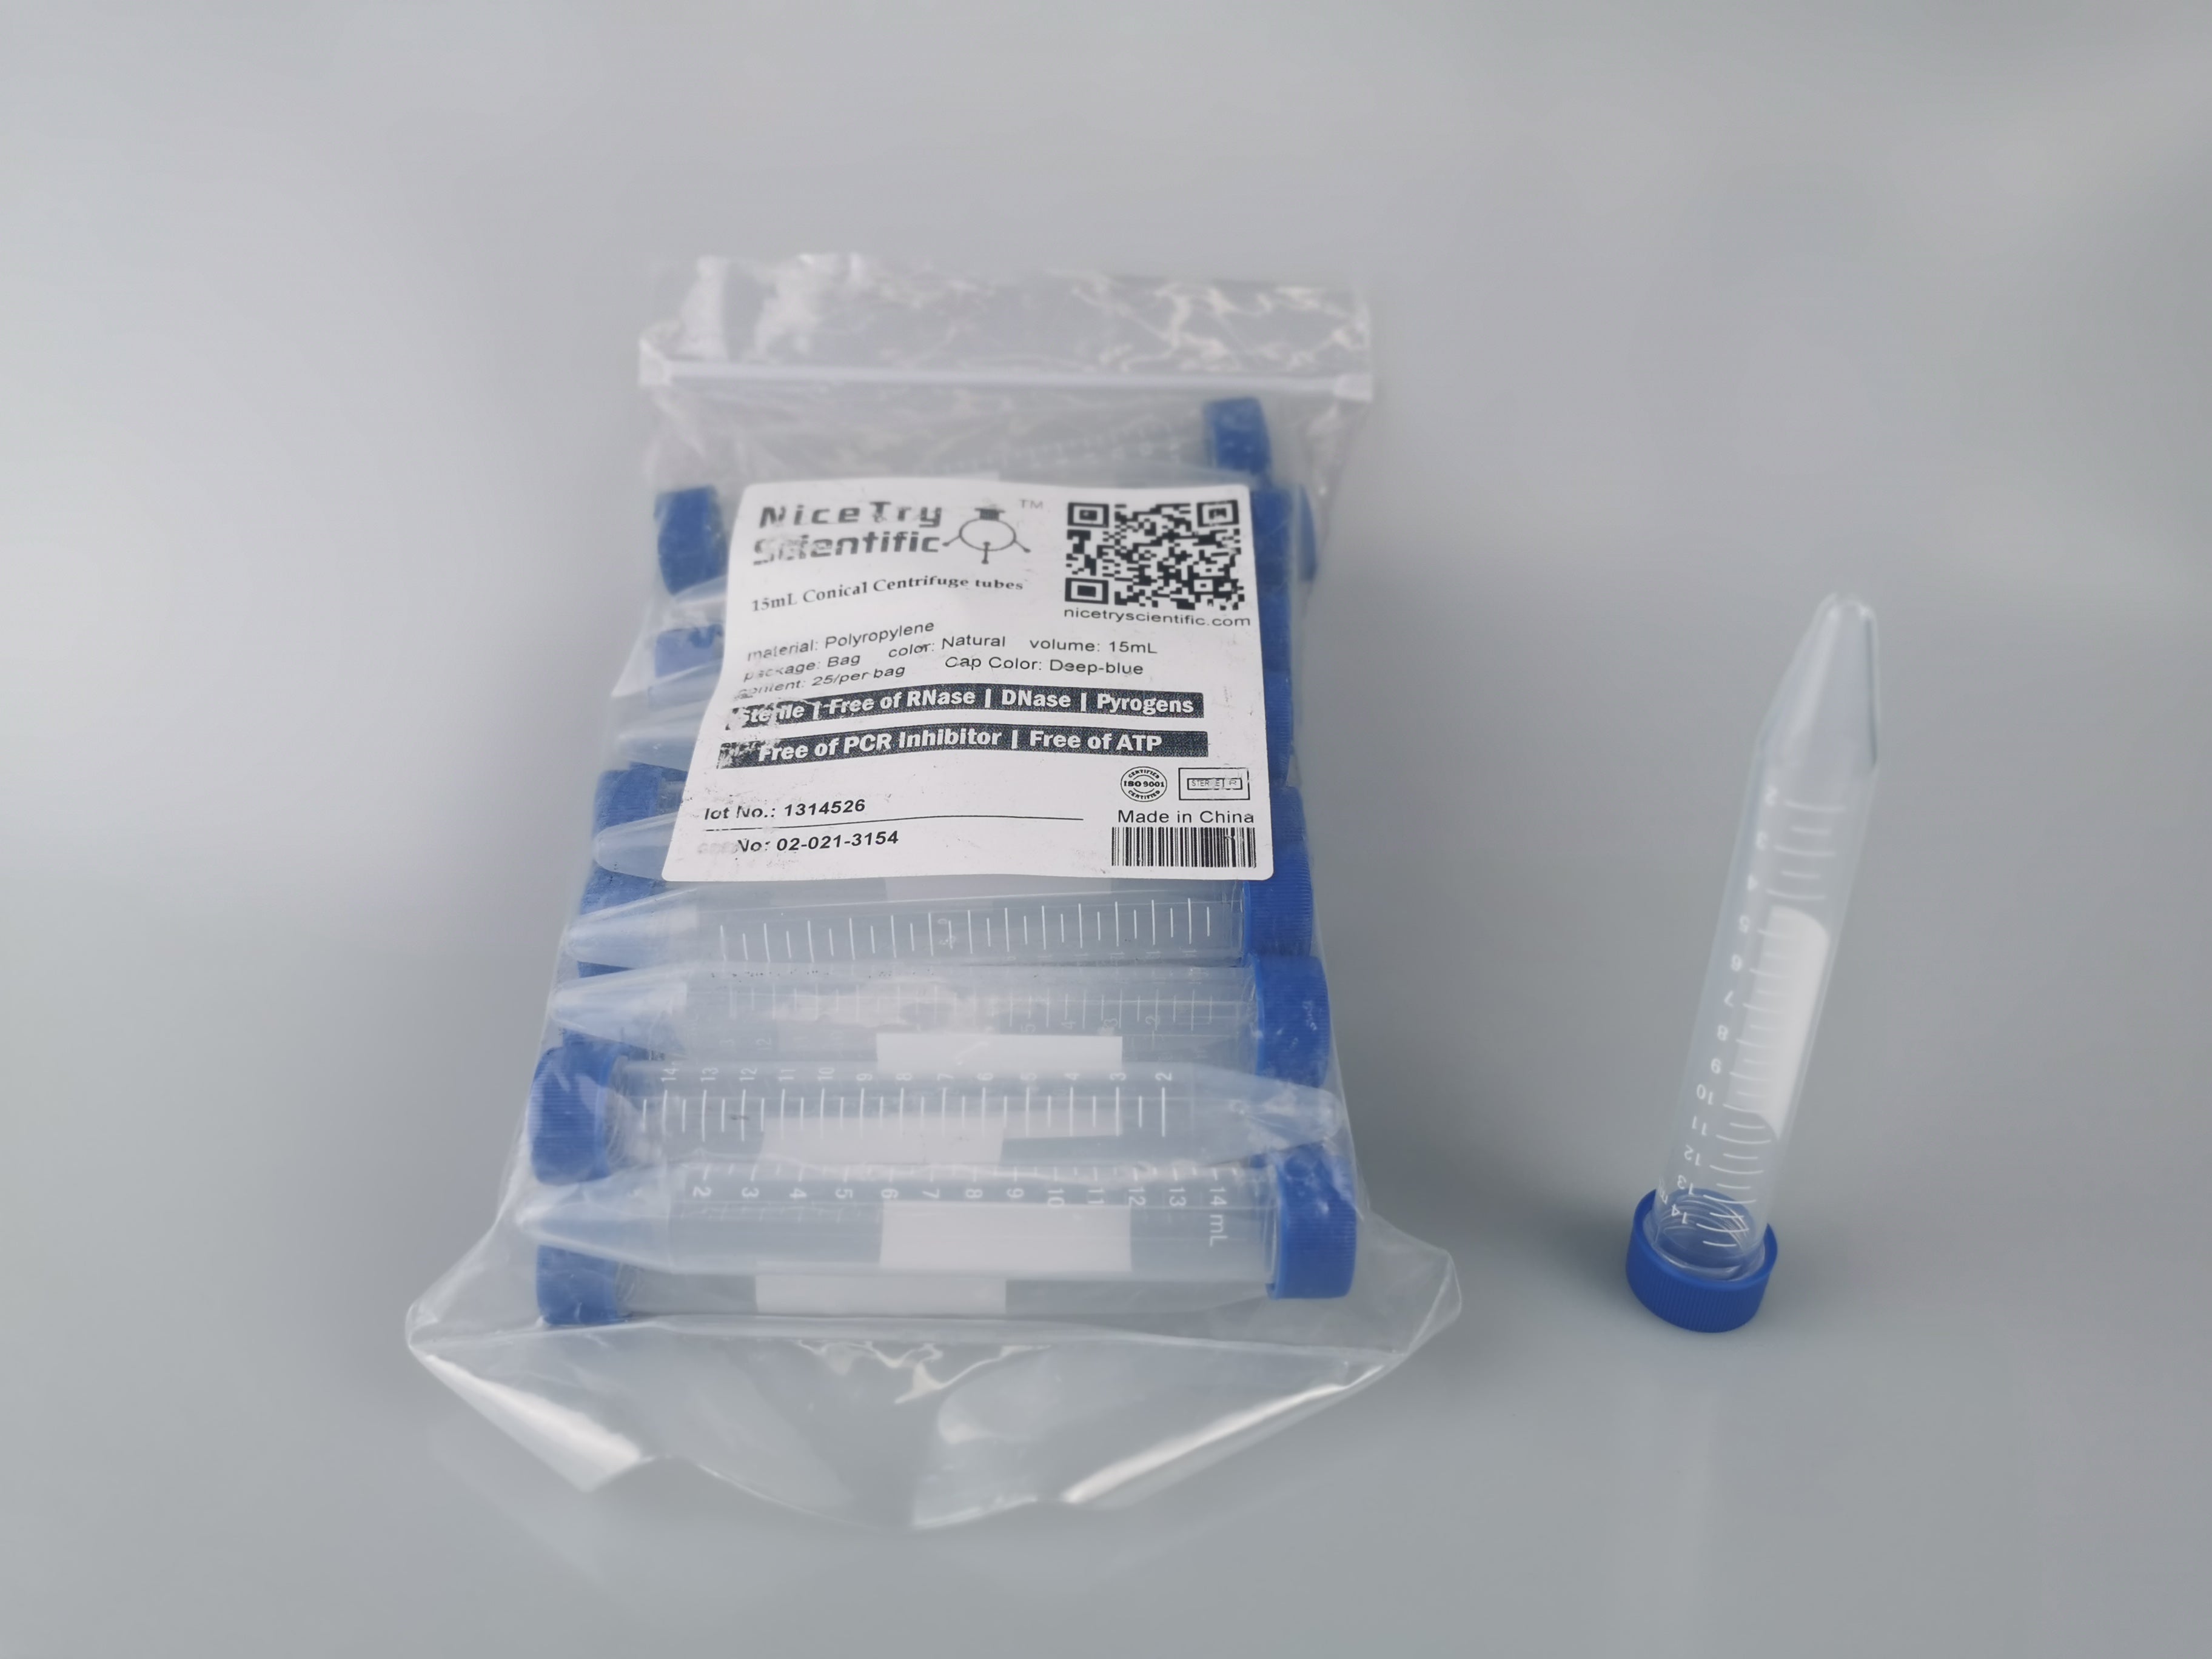 15mL Conical Centrifuge Tubes (in bag)